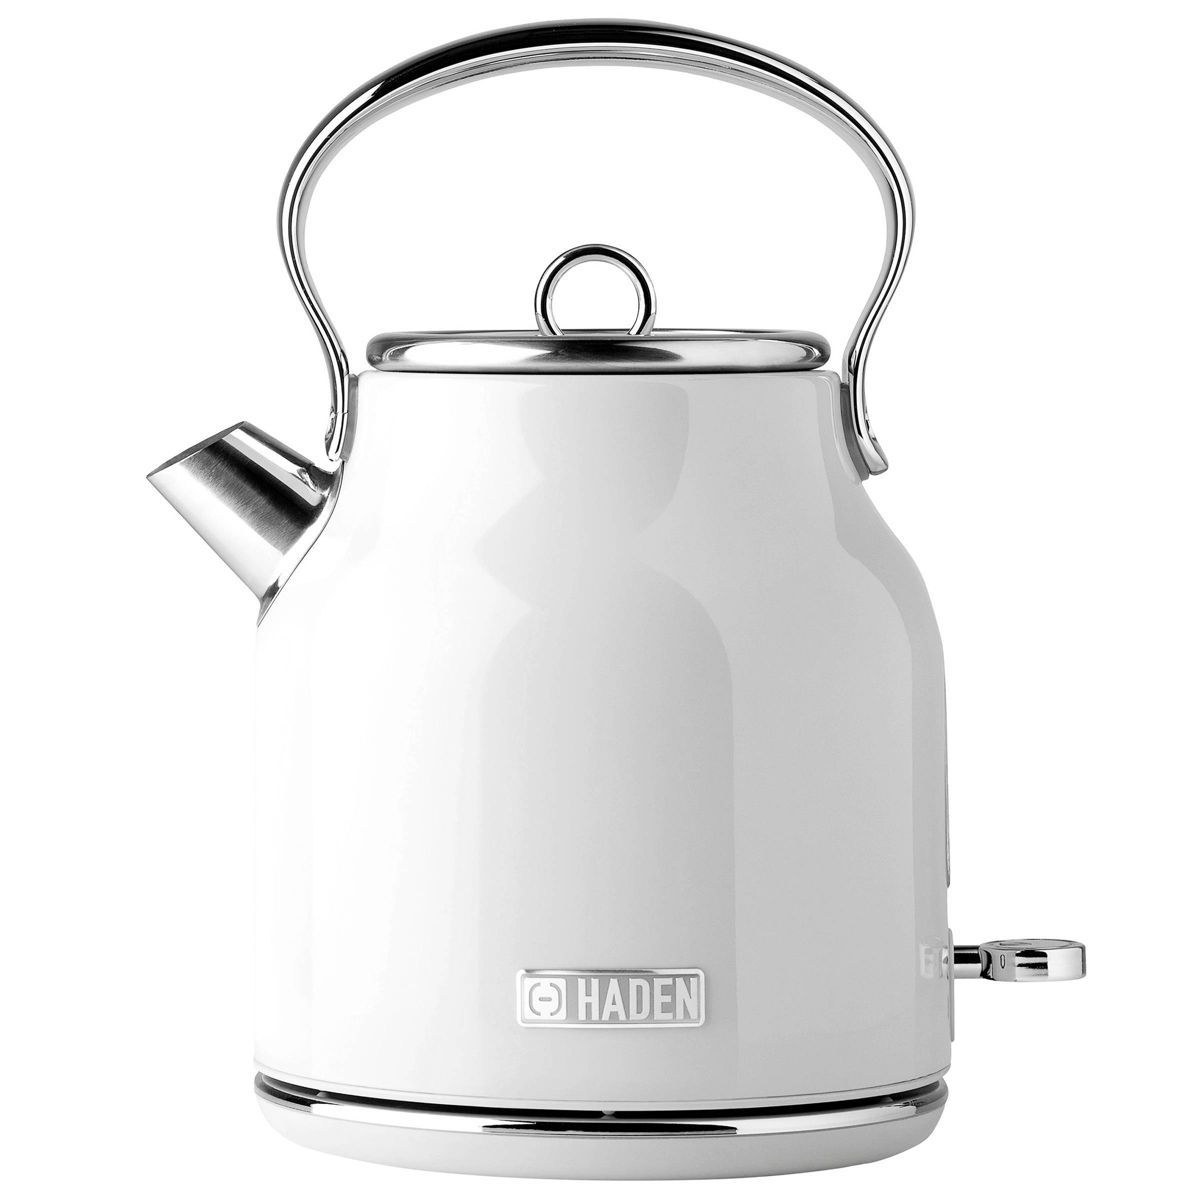 Haden Heritage 1.7L Stainless Steel Electric Cordless Kettle | Target